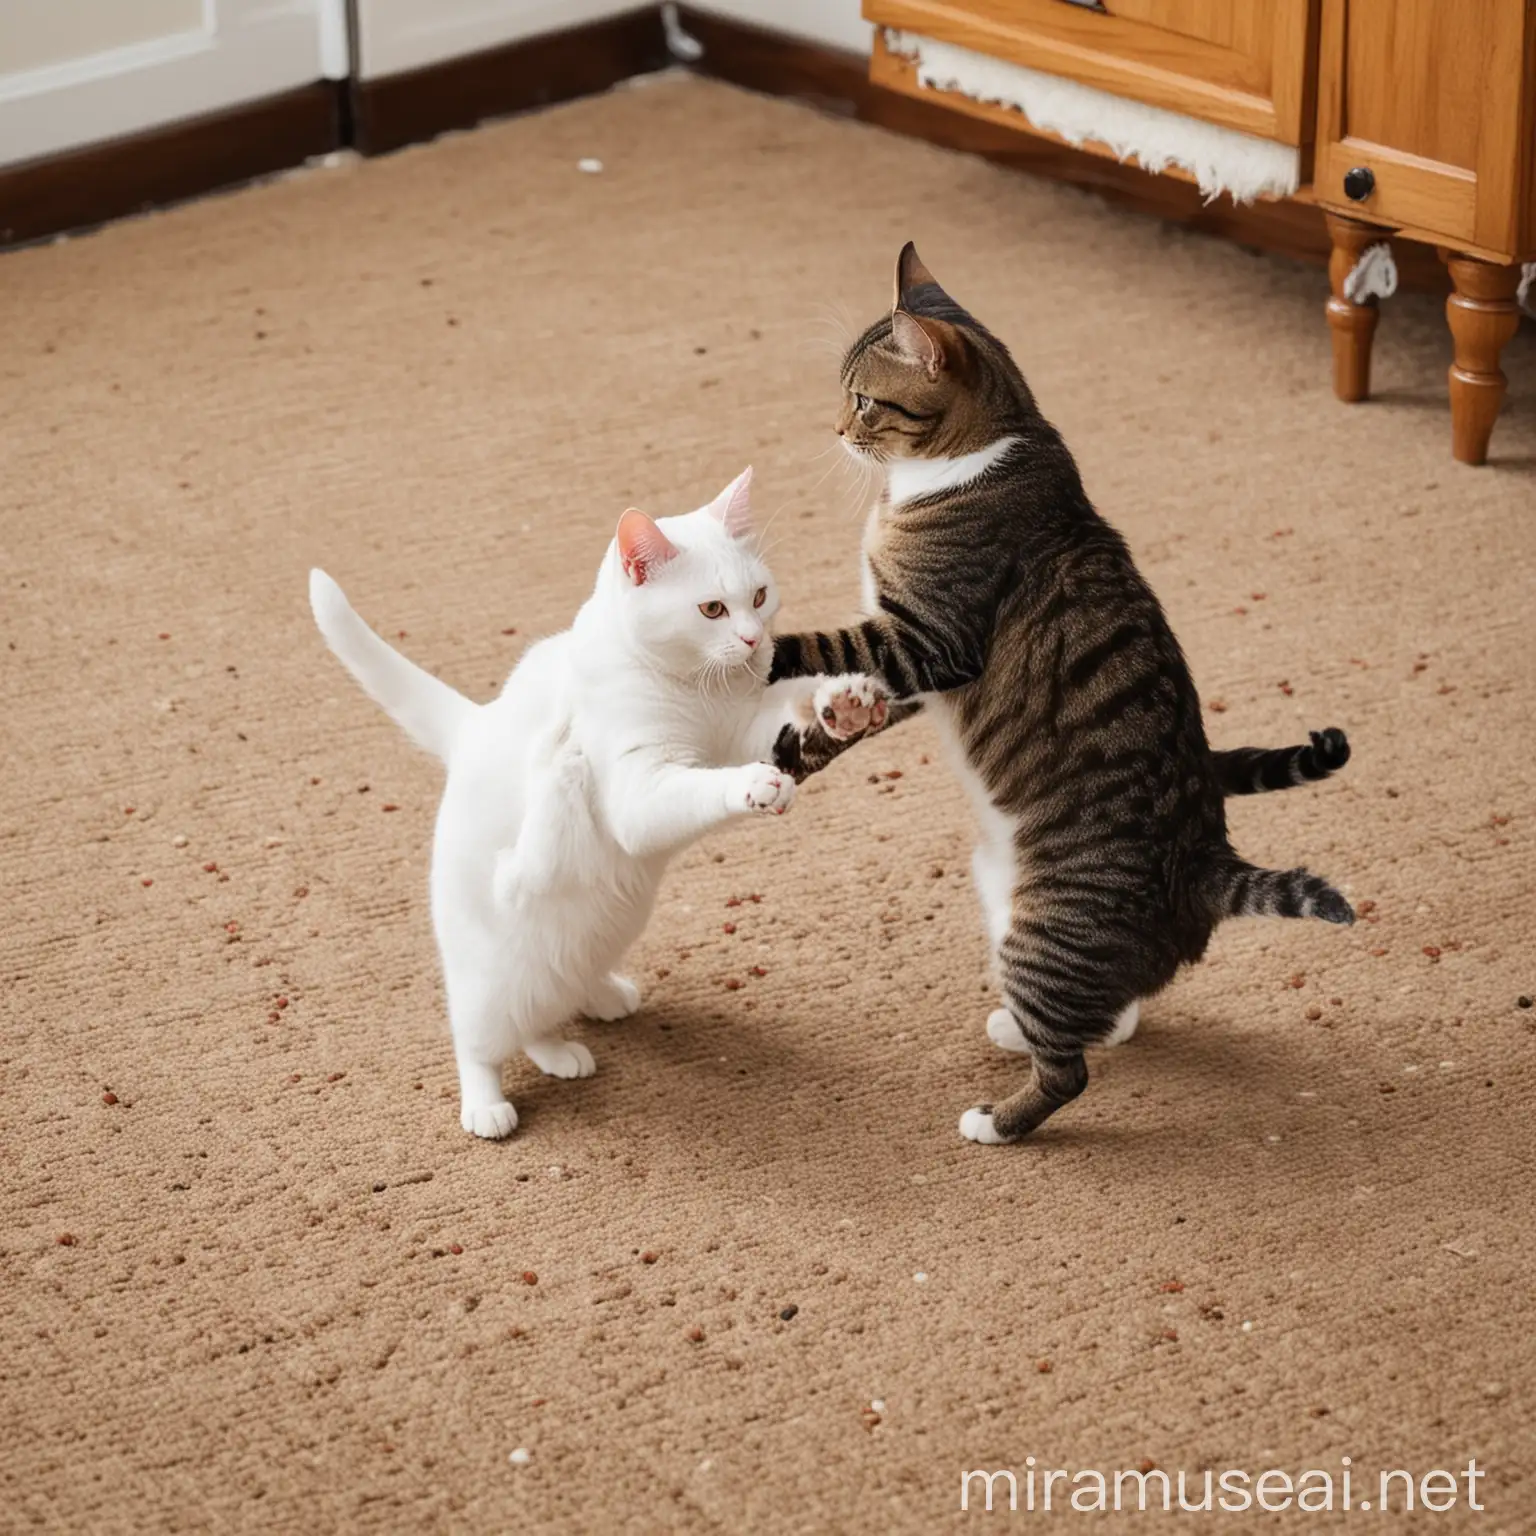 Playful Cat Wrestling Furry Friends Batting Paws in Floor Romp